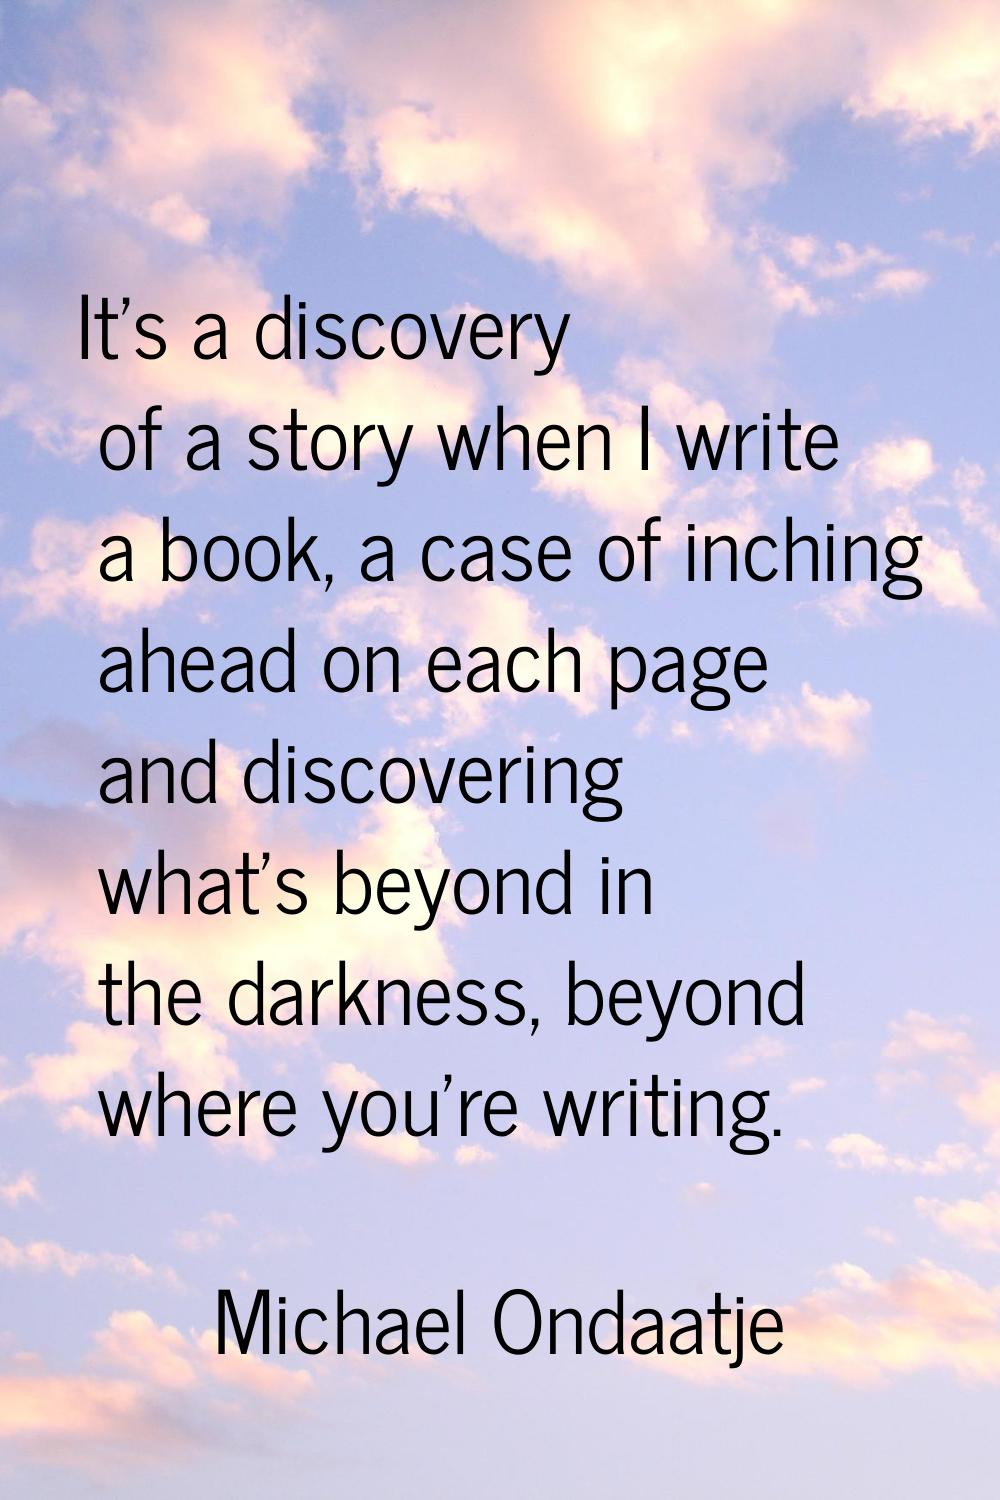 It's a discovery of a story when I write a book, a case of inching ahead on each page and discoveri